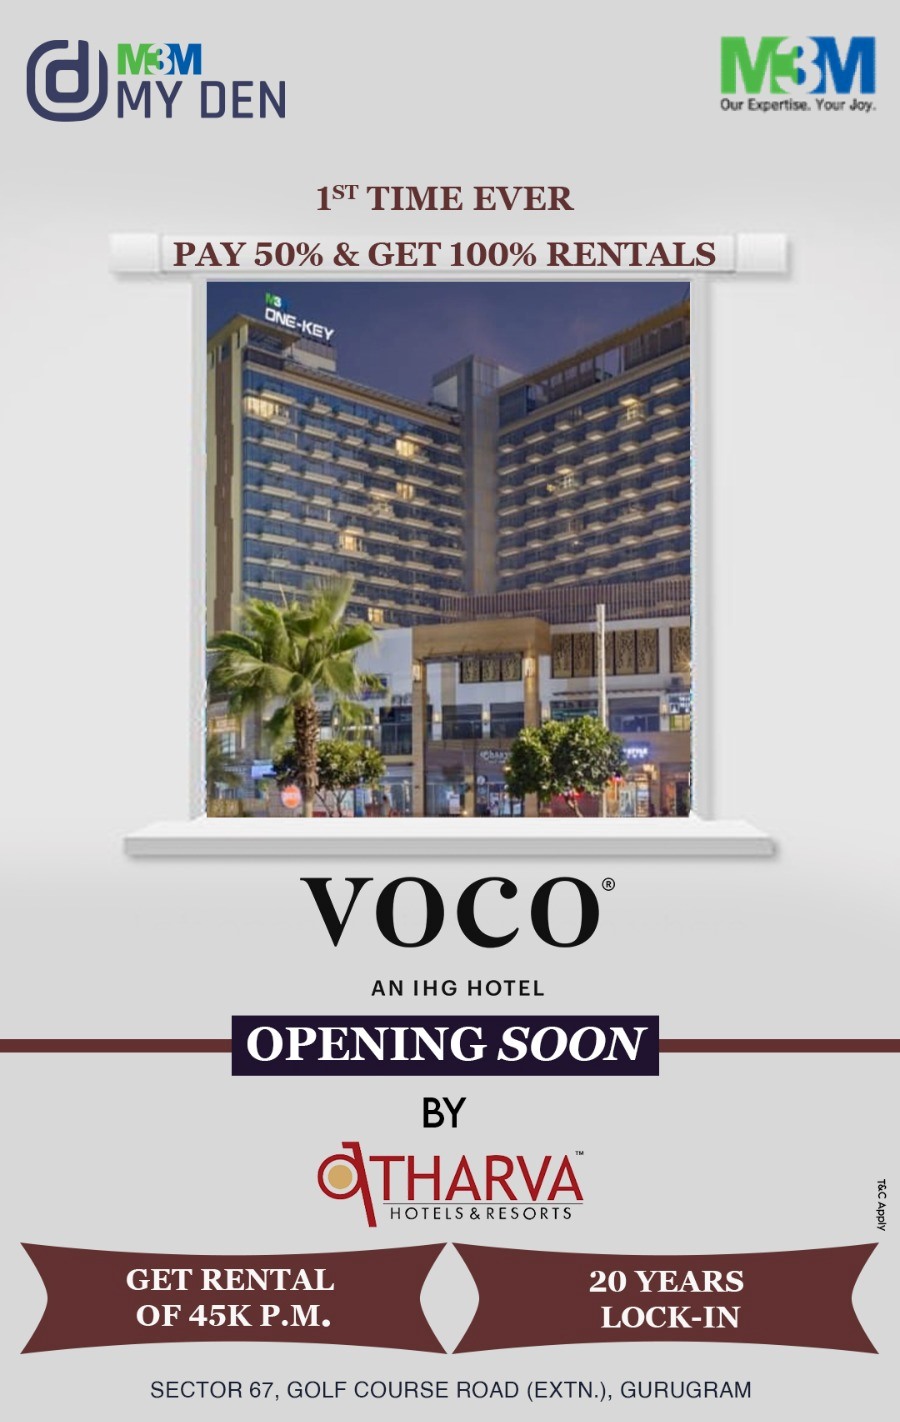 M3M My Den Voco an IHG Hotel by Atharva Hotels & Resorts at Sector 67, Gurgaon Update